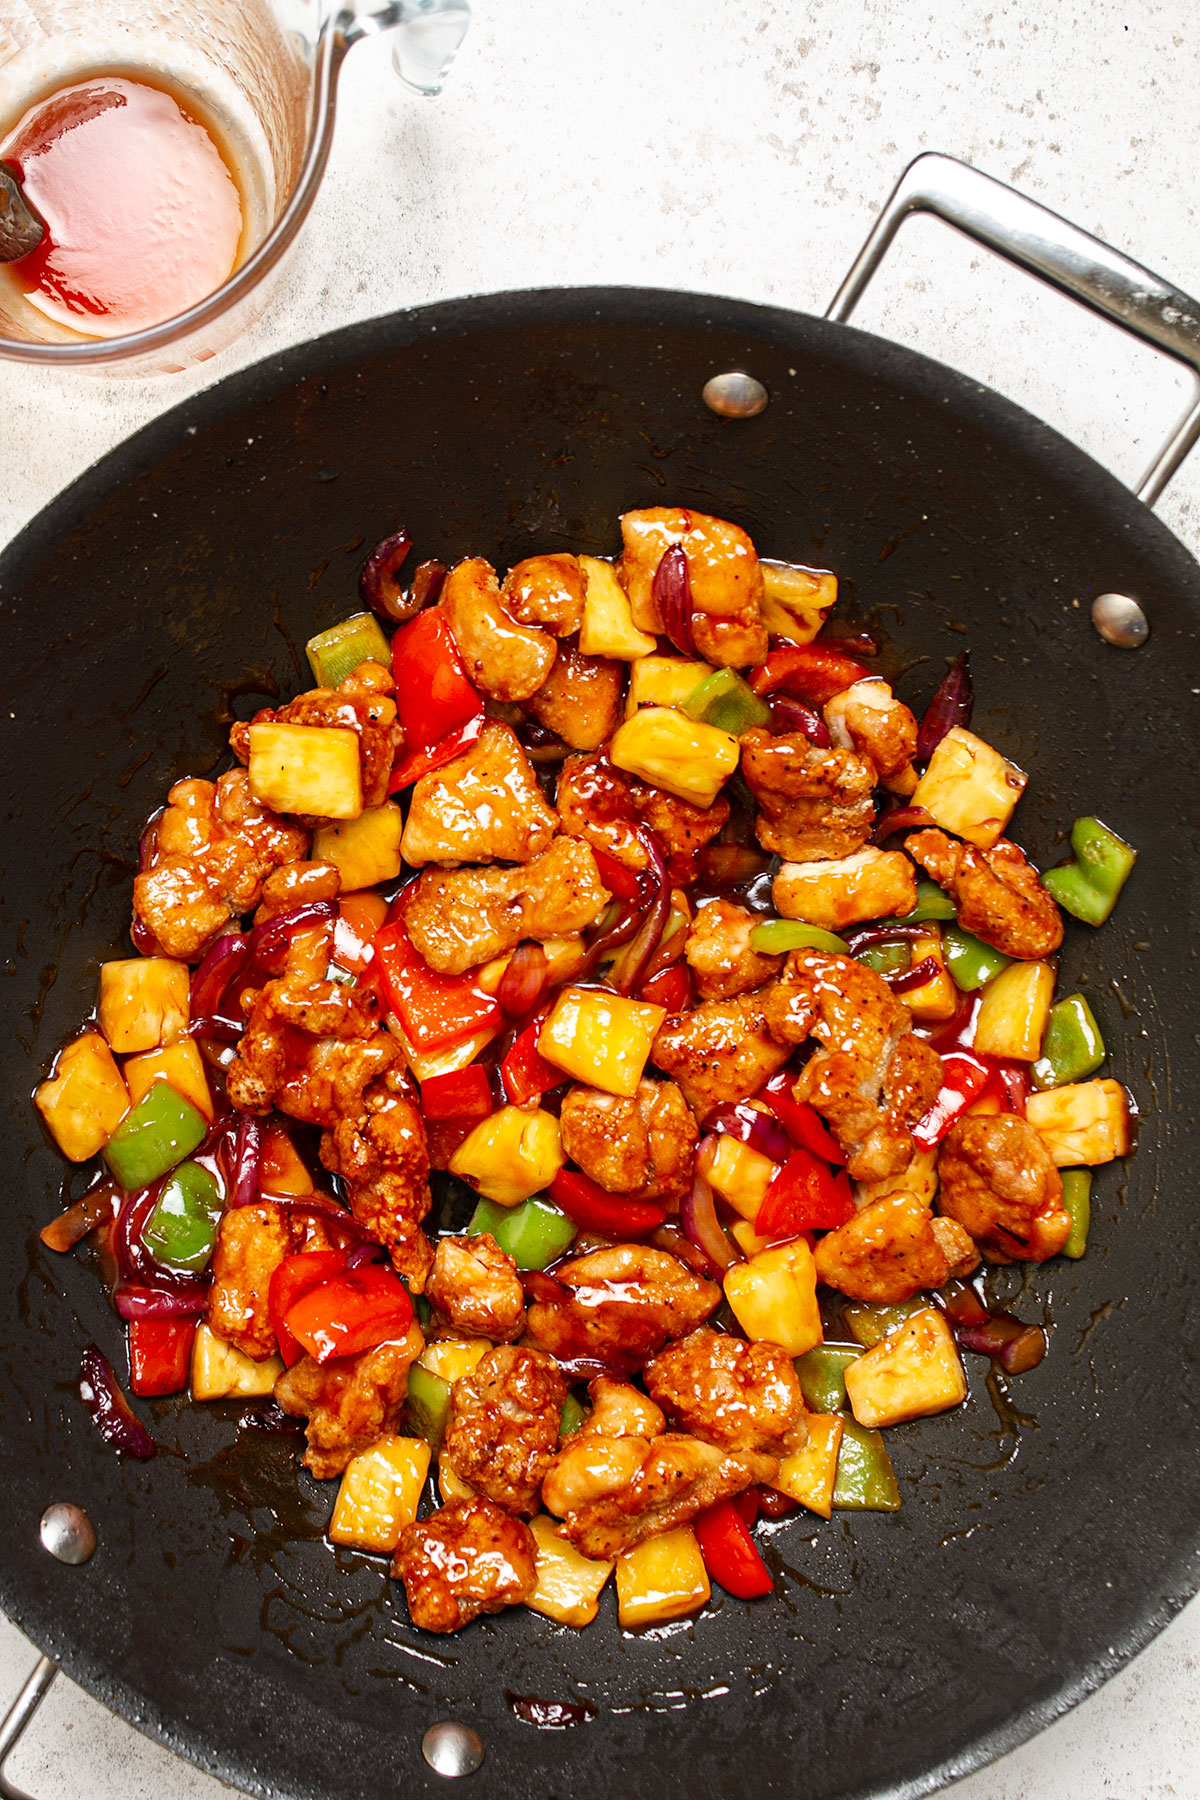 A wok containing the cooked veggies and fried chicken coated in the sweet and sour sauce.